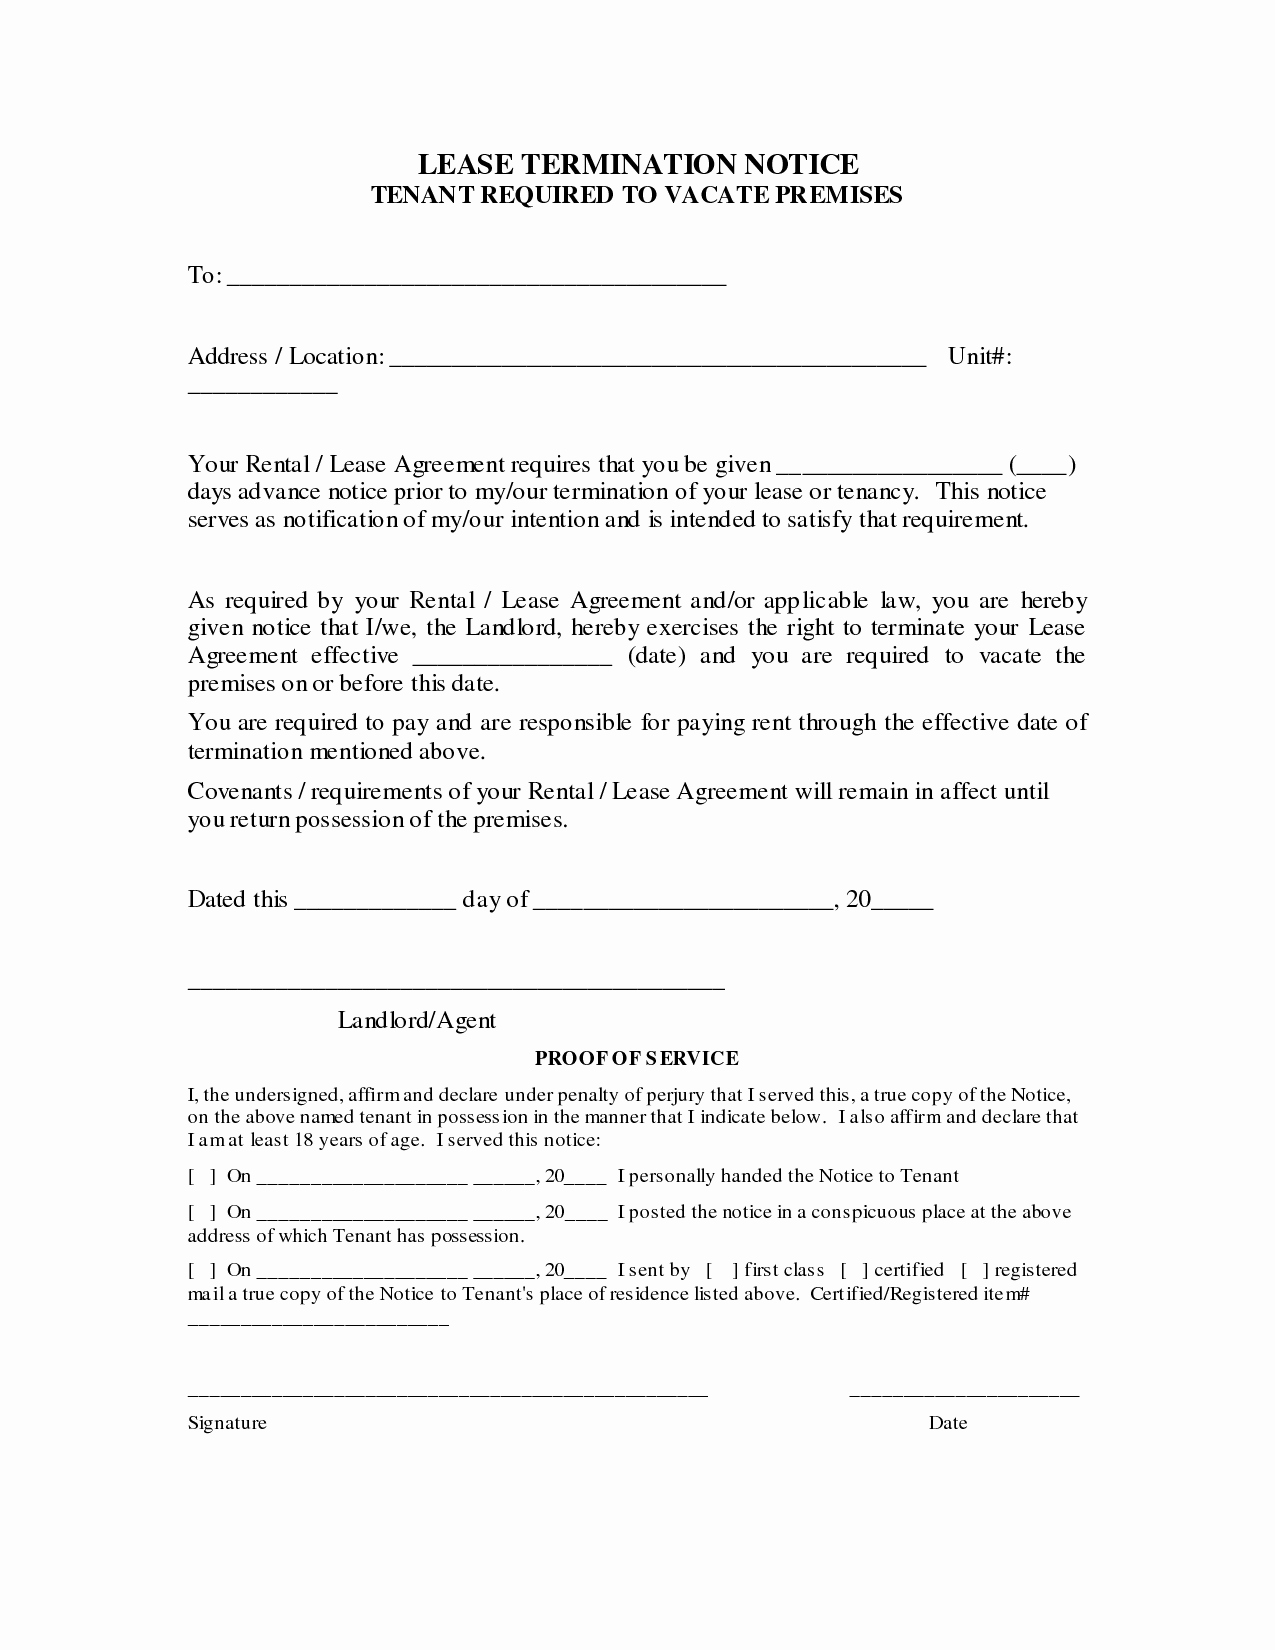 12 Best Of Proof Lease Agreement Letter Lease